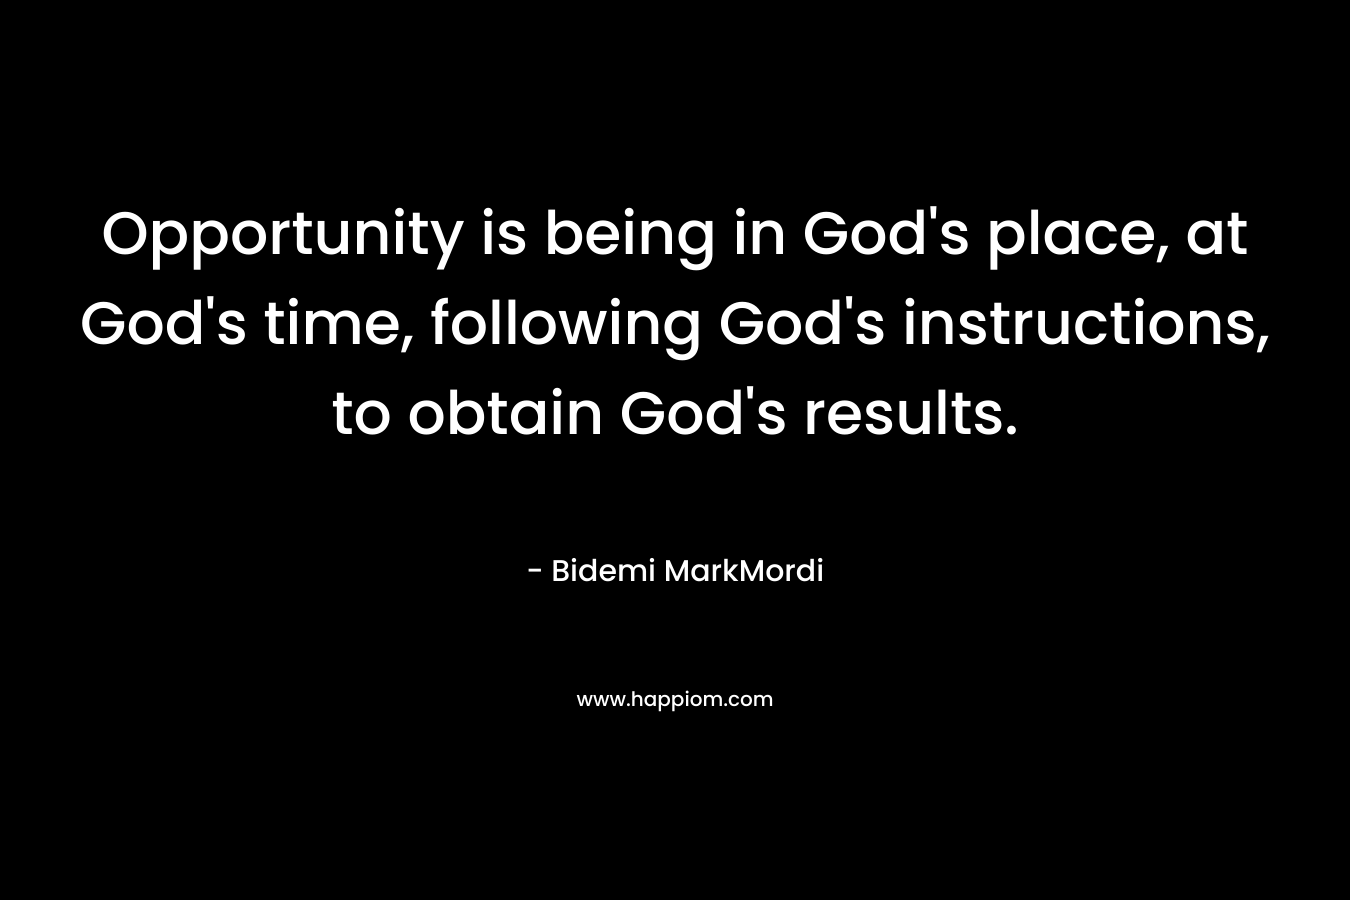 Opportunity is being in God's place, at God's time, following God's instructions, to obtain God's results.